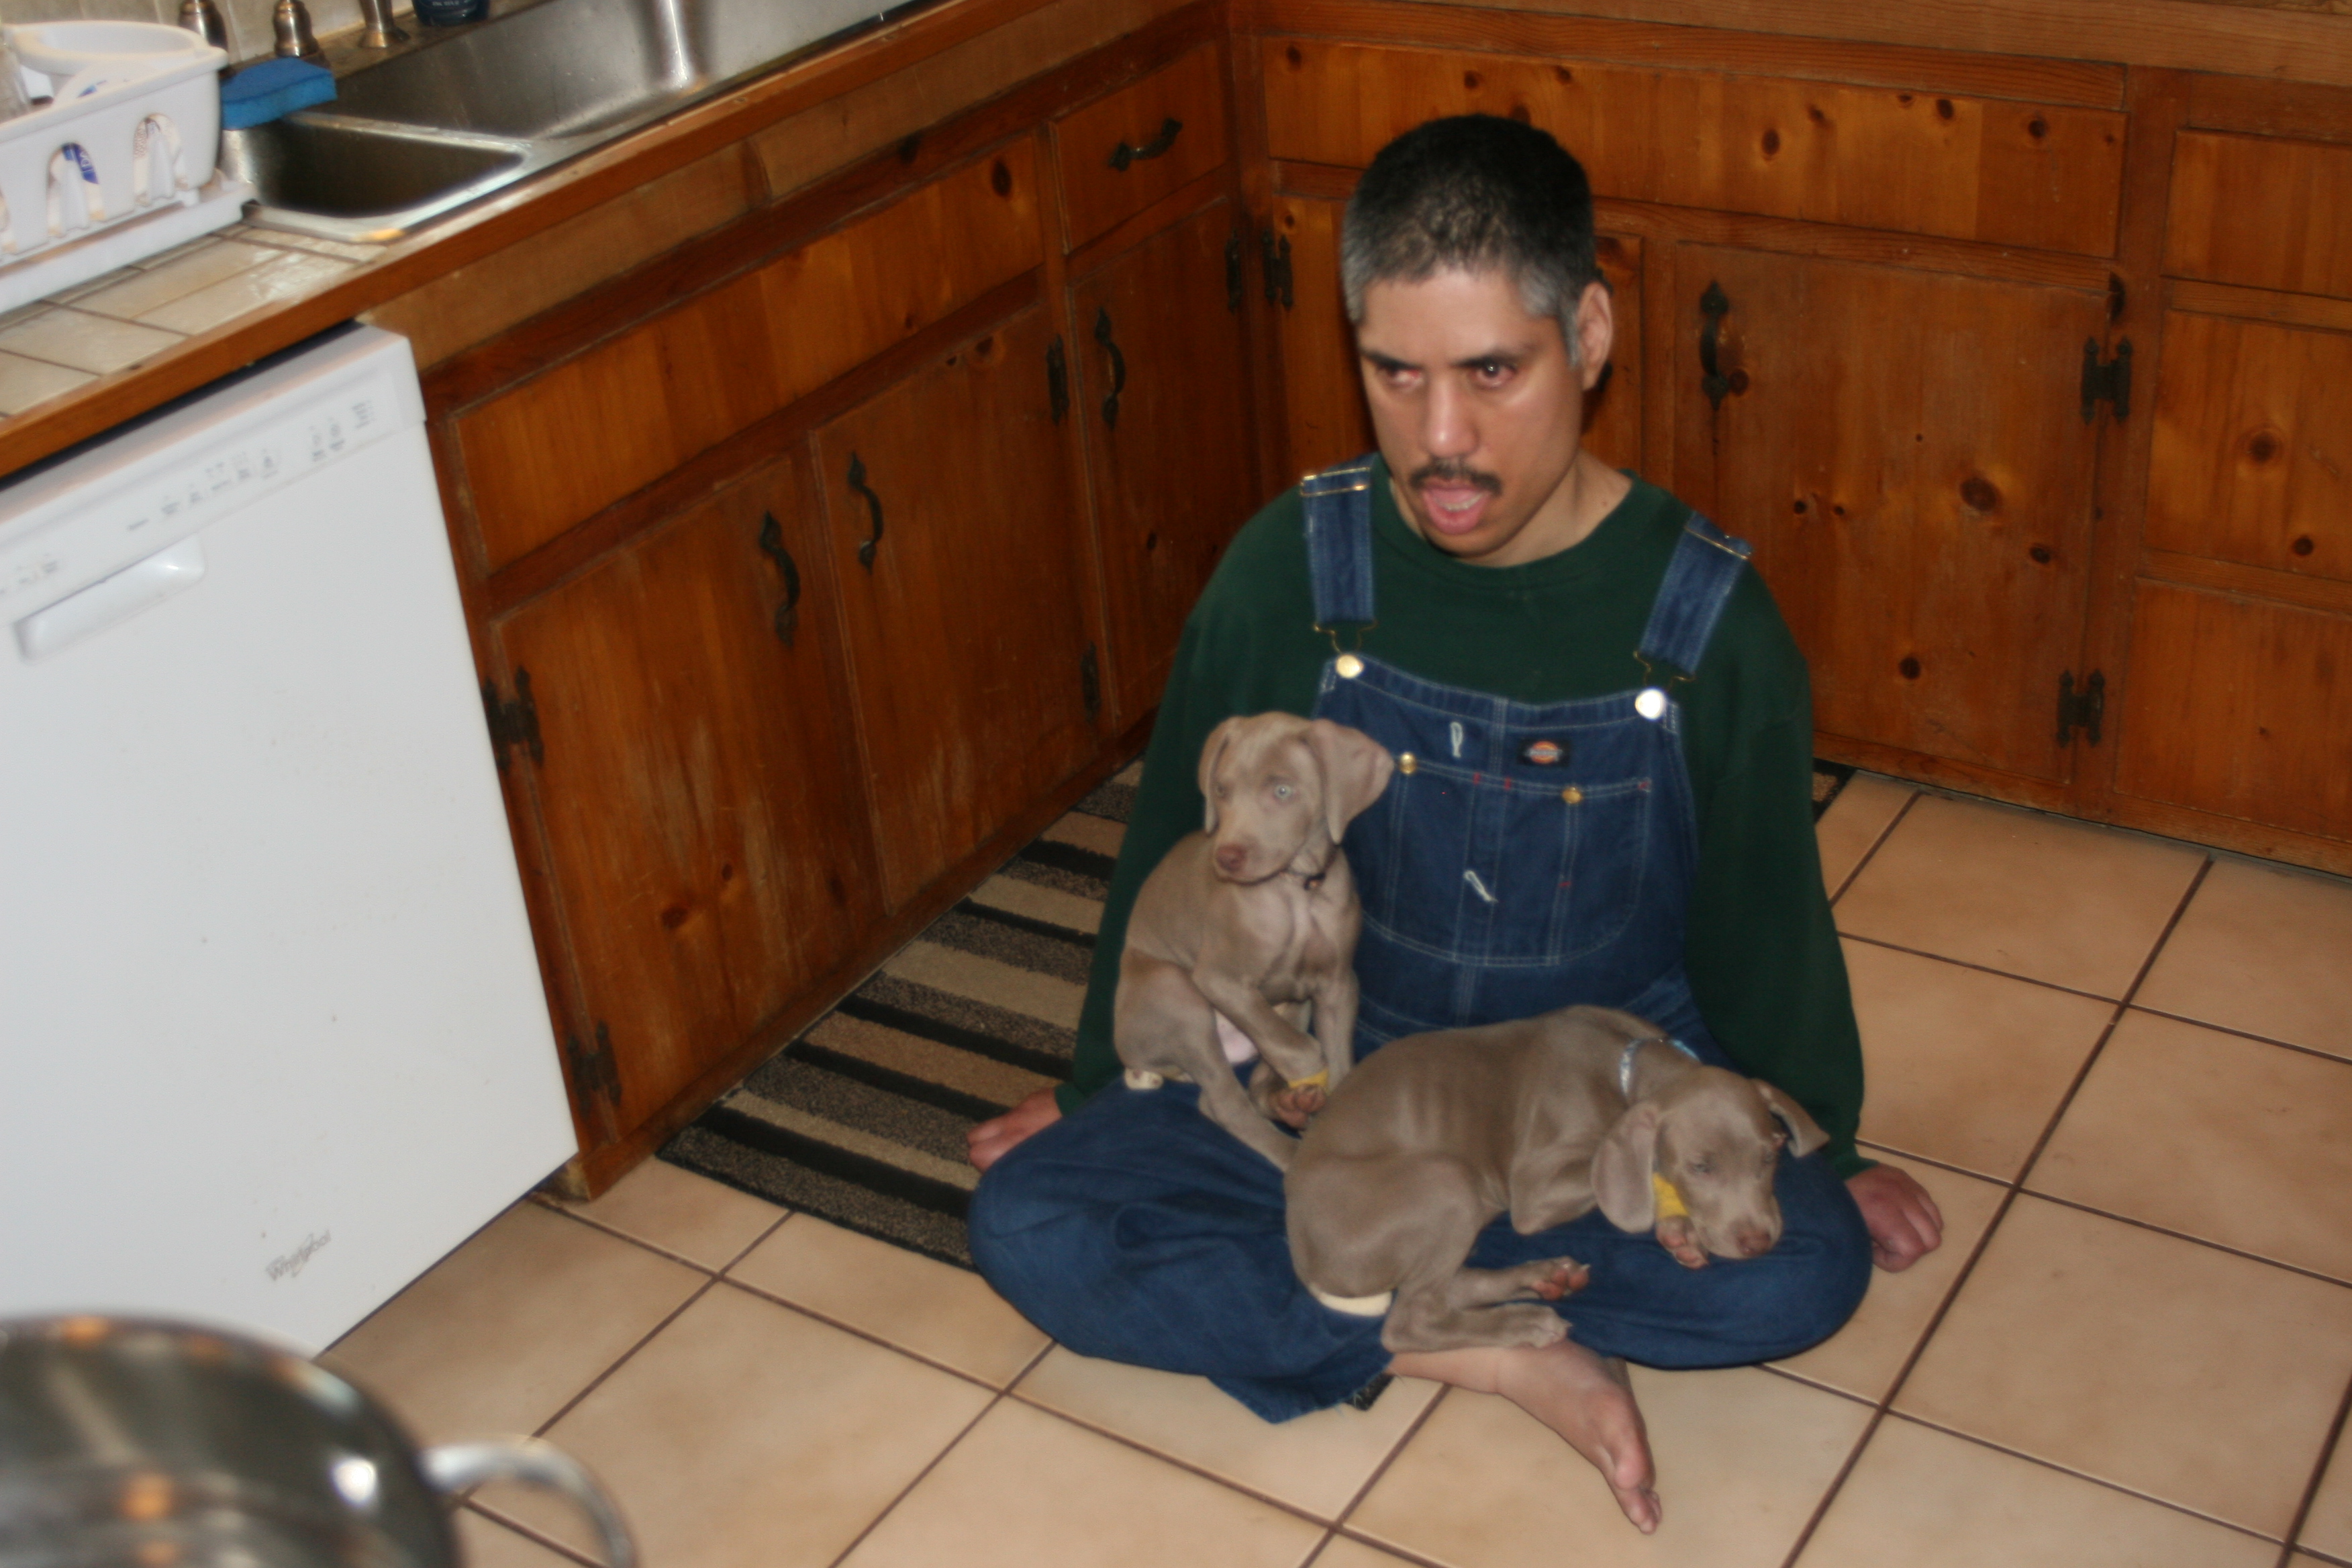 This was the first time, Patrick met the puppies. They stayed with Pat for over 45 minutes.  Pat "Look what Mom got Me!"